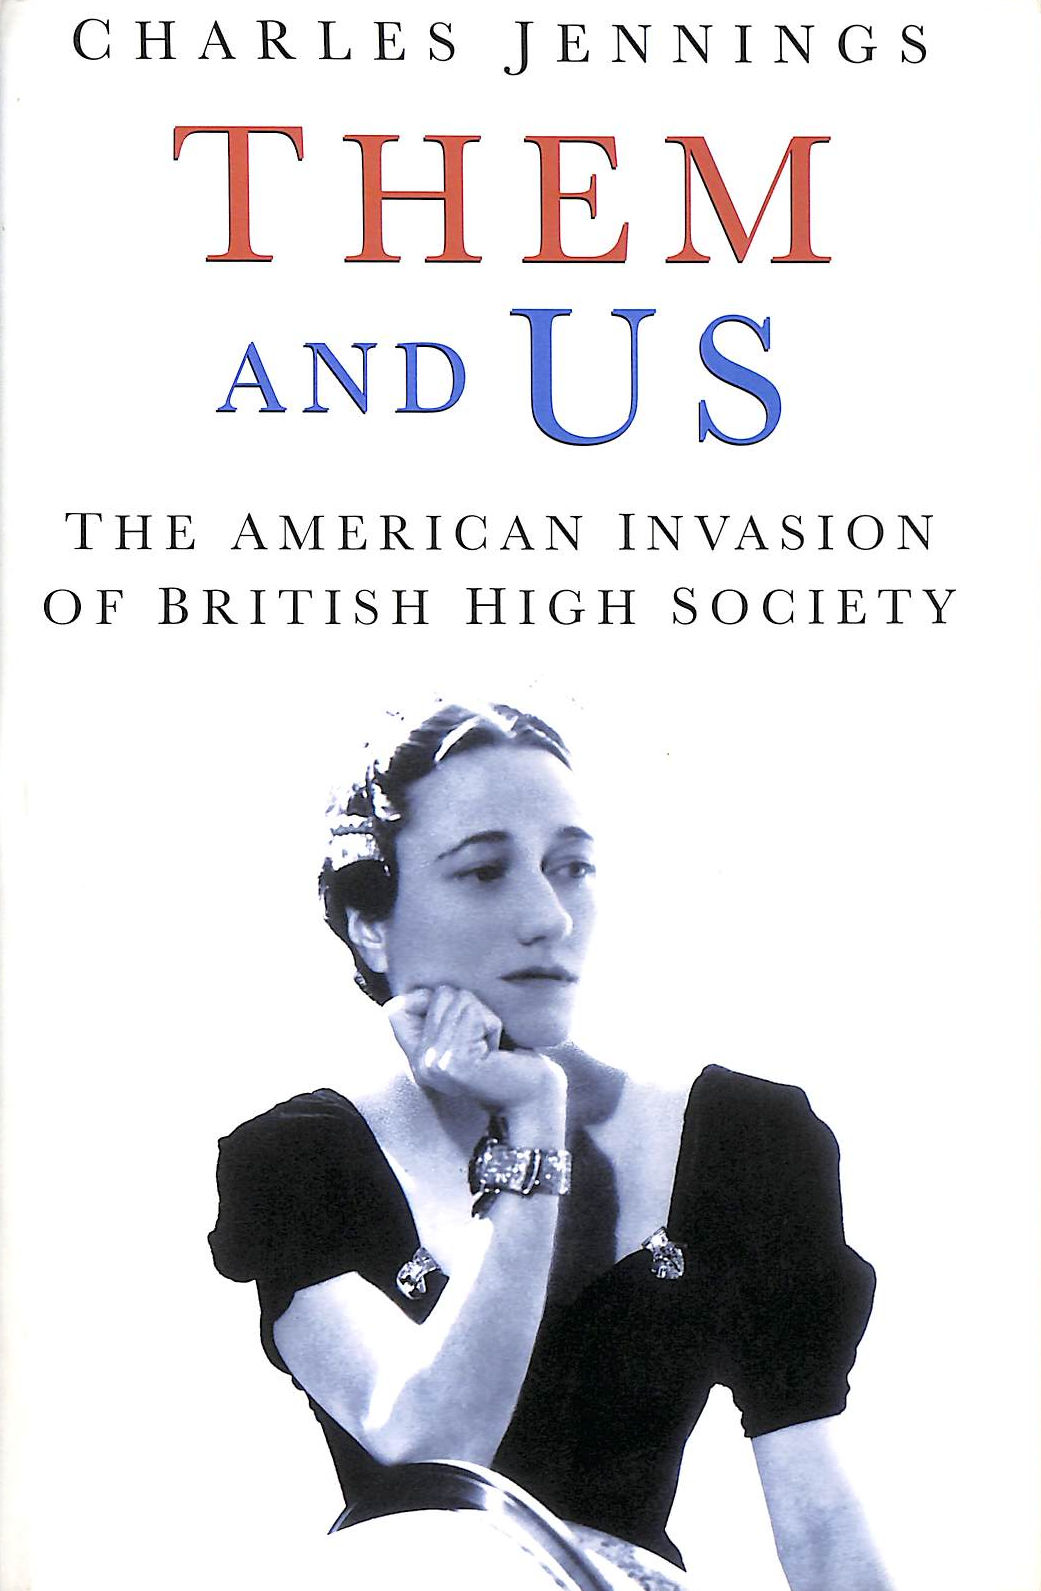 CHARLES JENNINGS - Them and Us: The American Invasion of British High Society